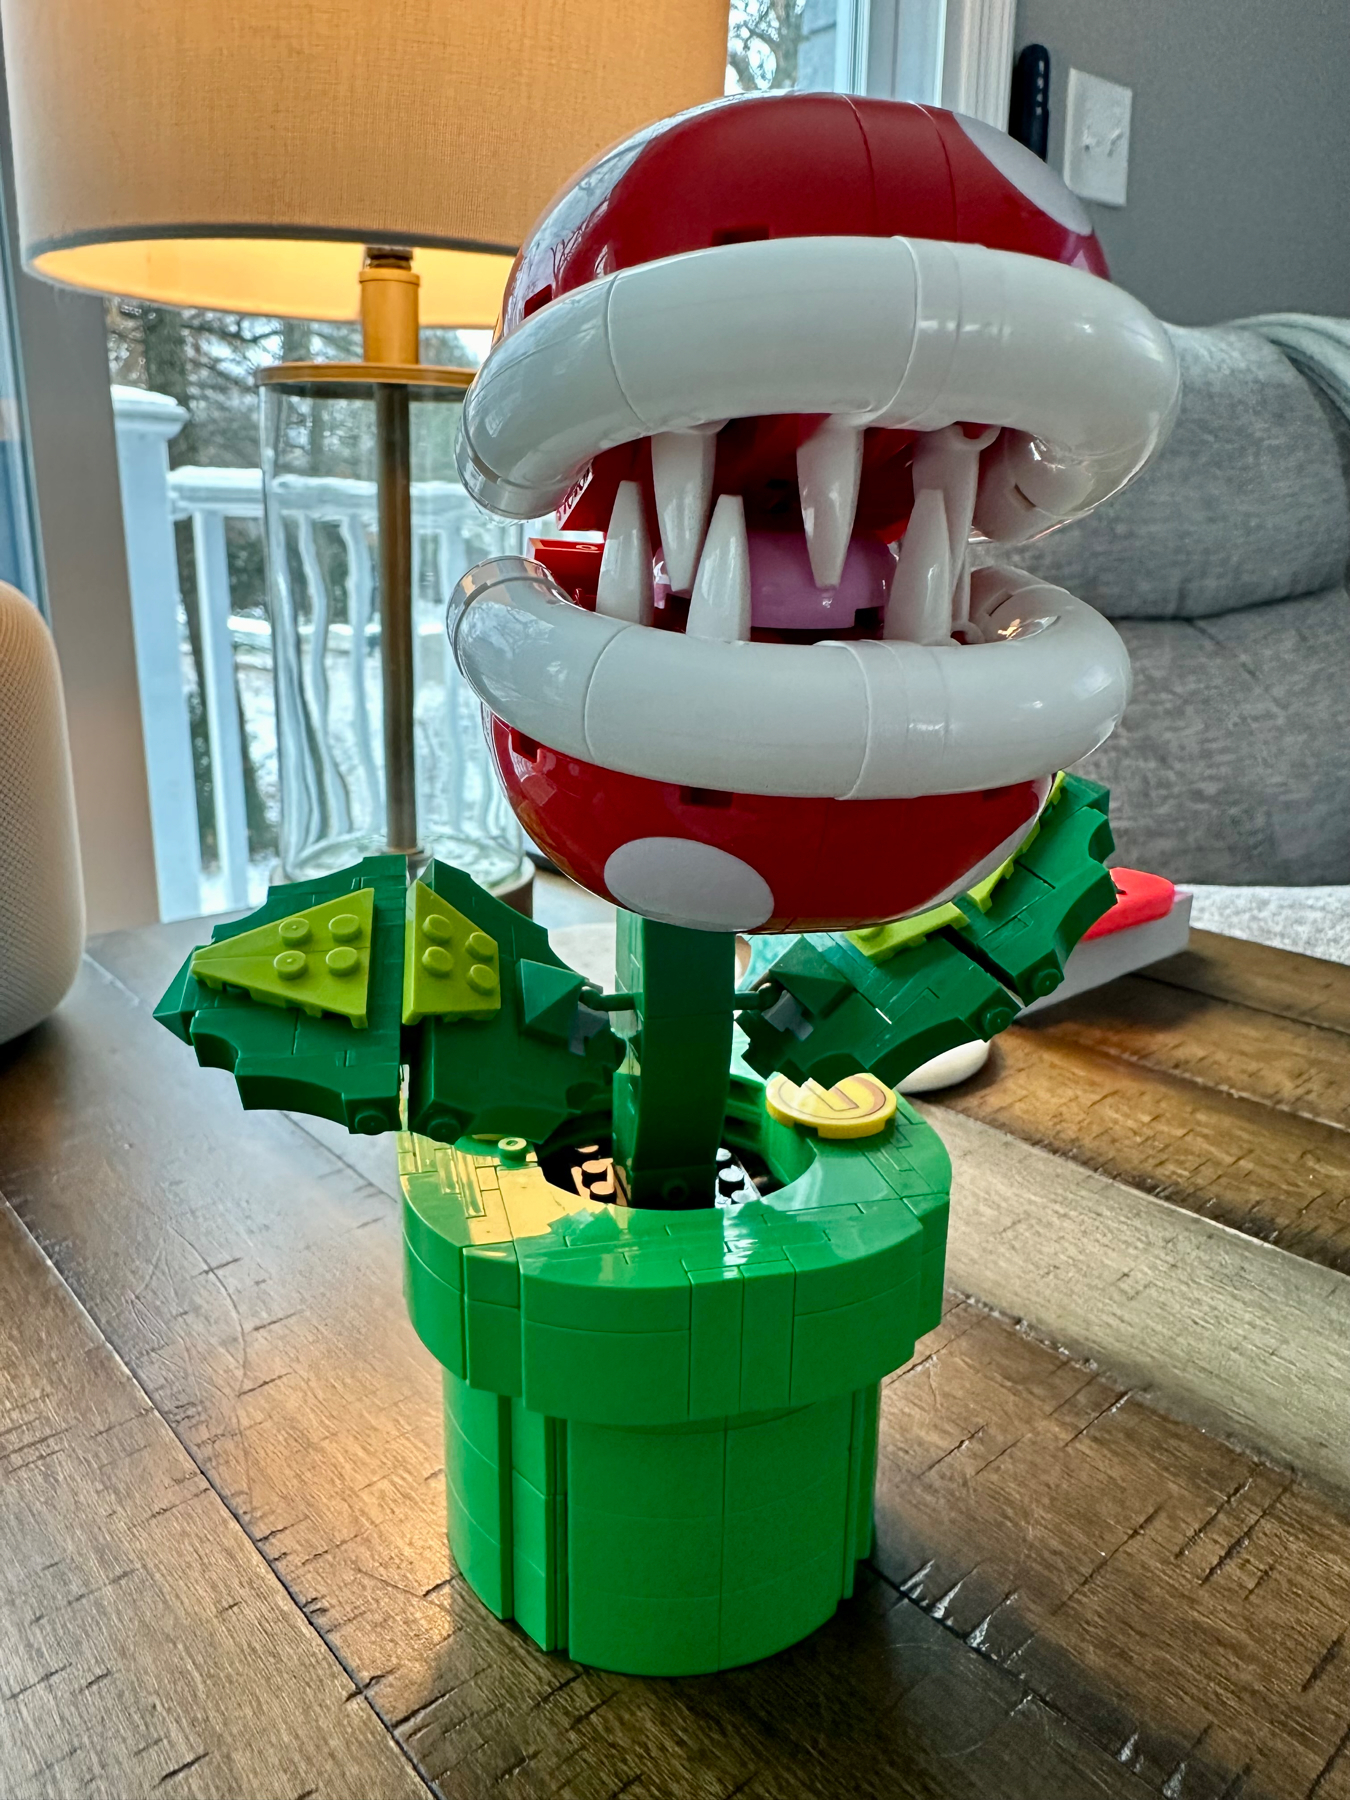 A LEGO set model of a Piranha Plant from the Super Mario series displayed on a wooden floor with a lamp and a window showing a snowy scene in the background.